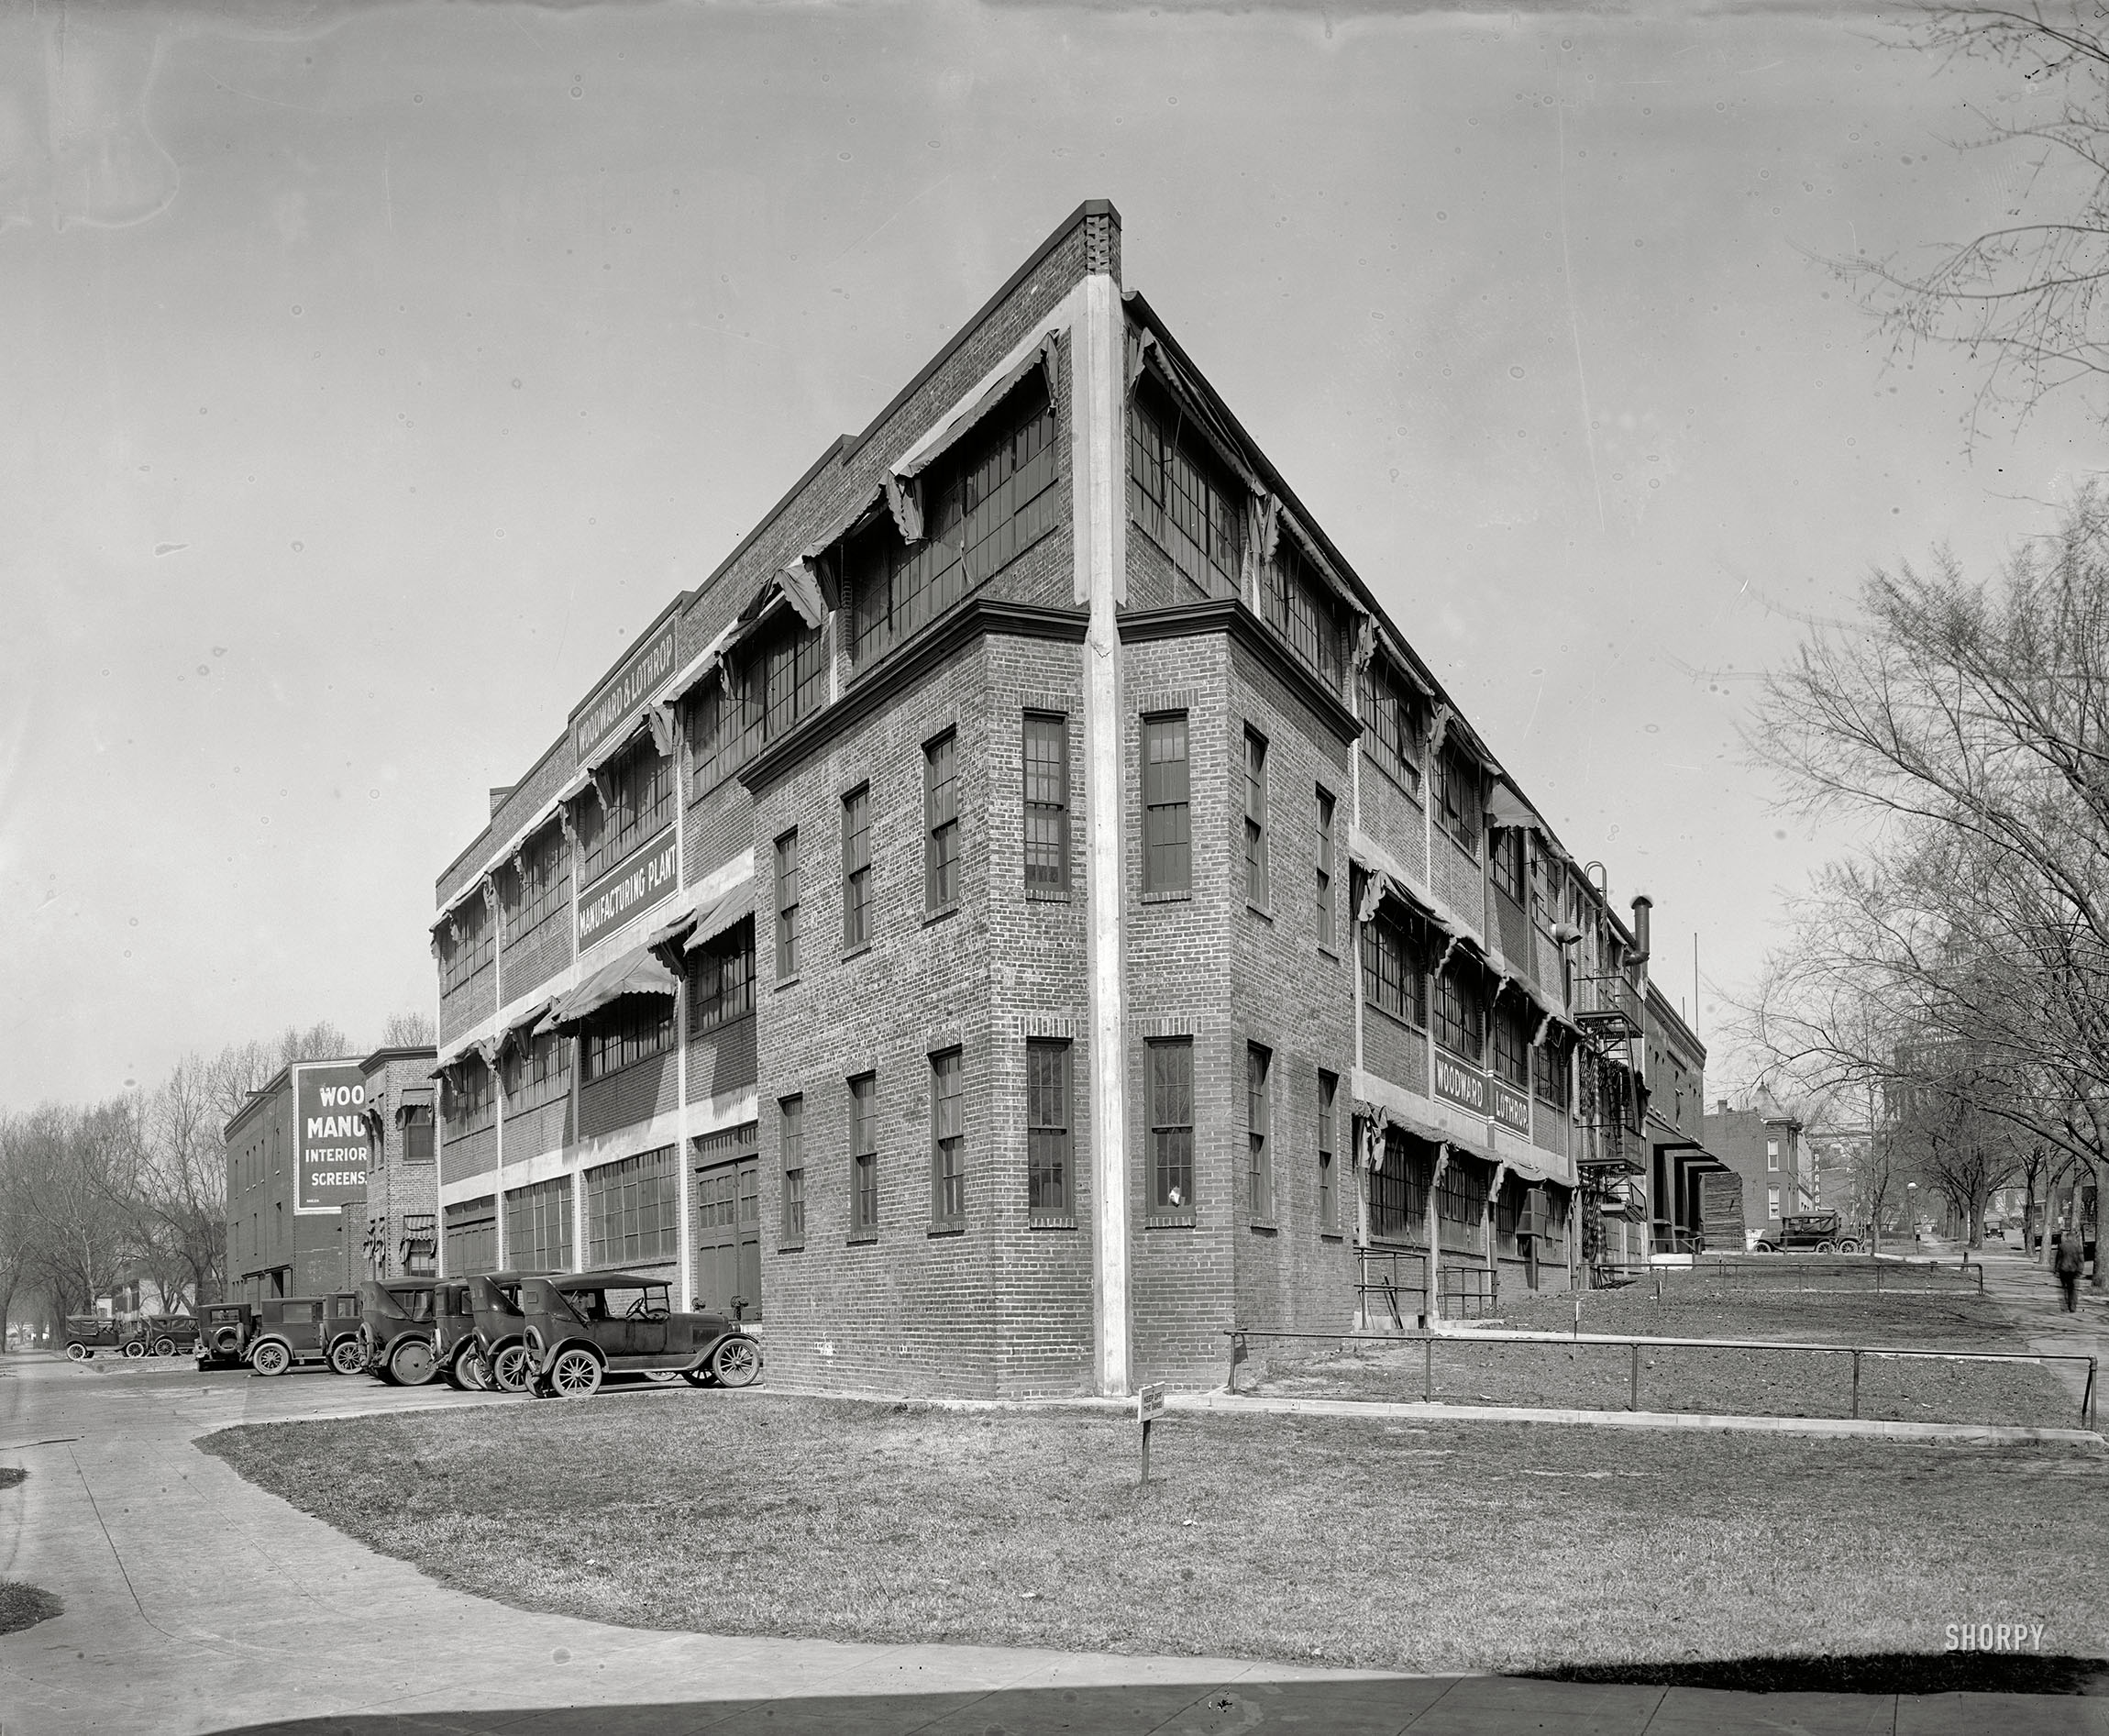 Circa 1926. "Woodward & Lothrop warehouse." Manufacturing plant for the long-gone D.C. department store. National Photo glass negative. View full size.